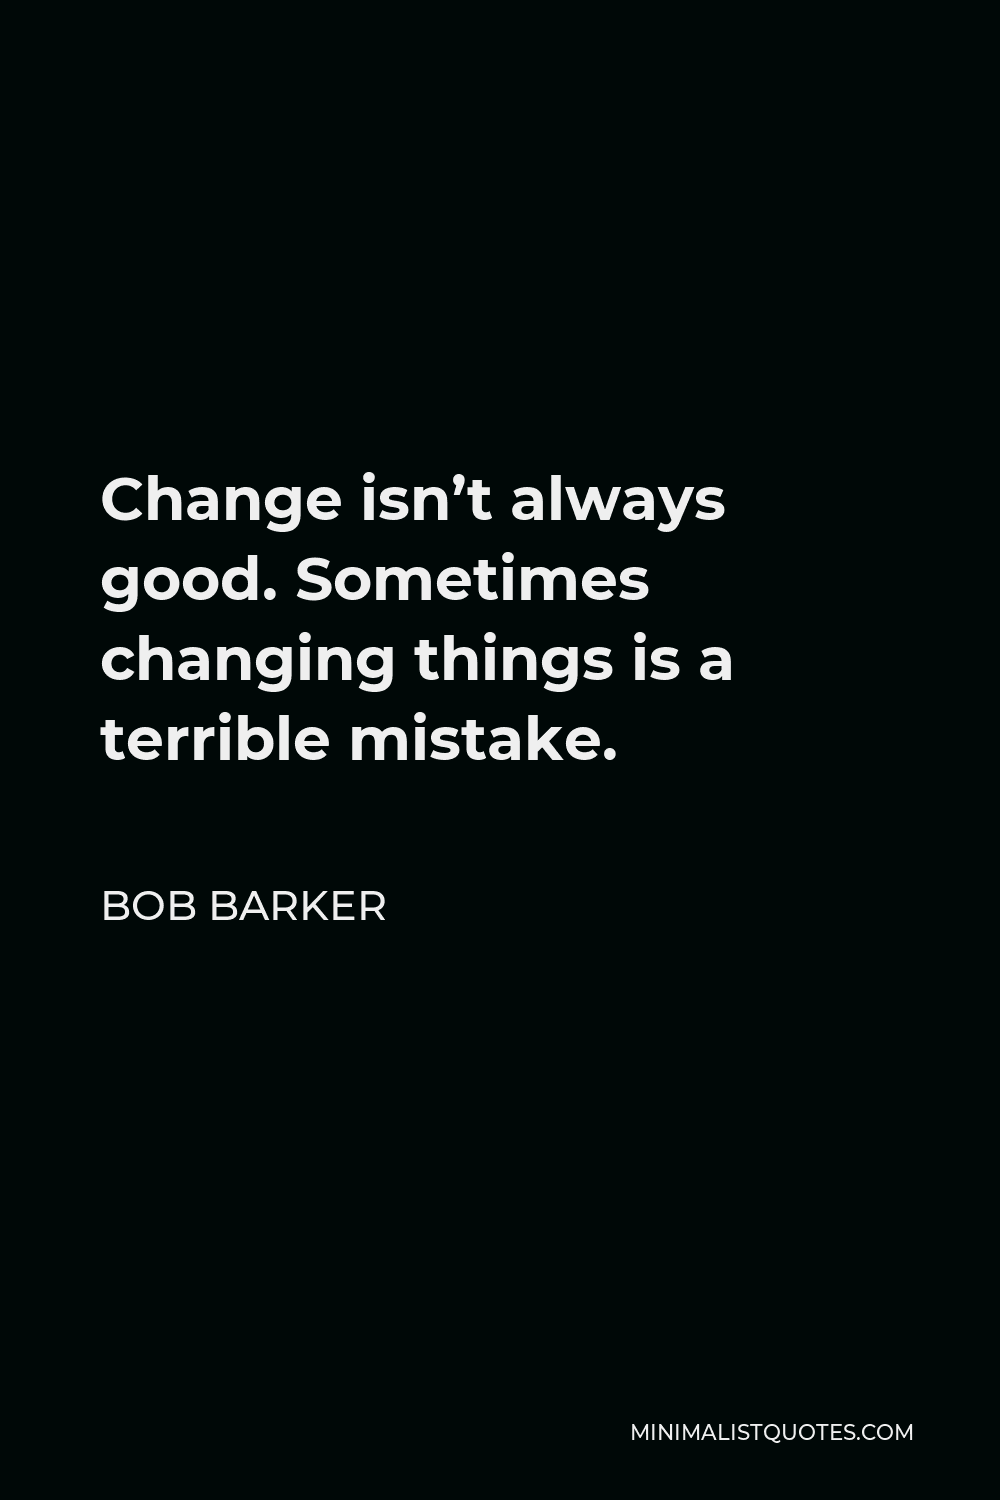 Bob Barker Quote - Change isn’t always good. Sometimes changing things is a terrible mistake.